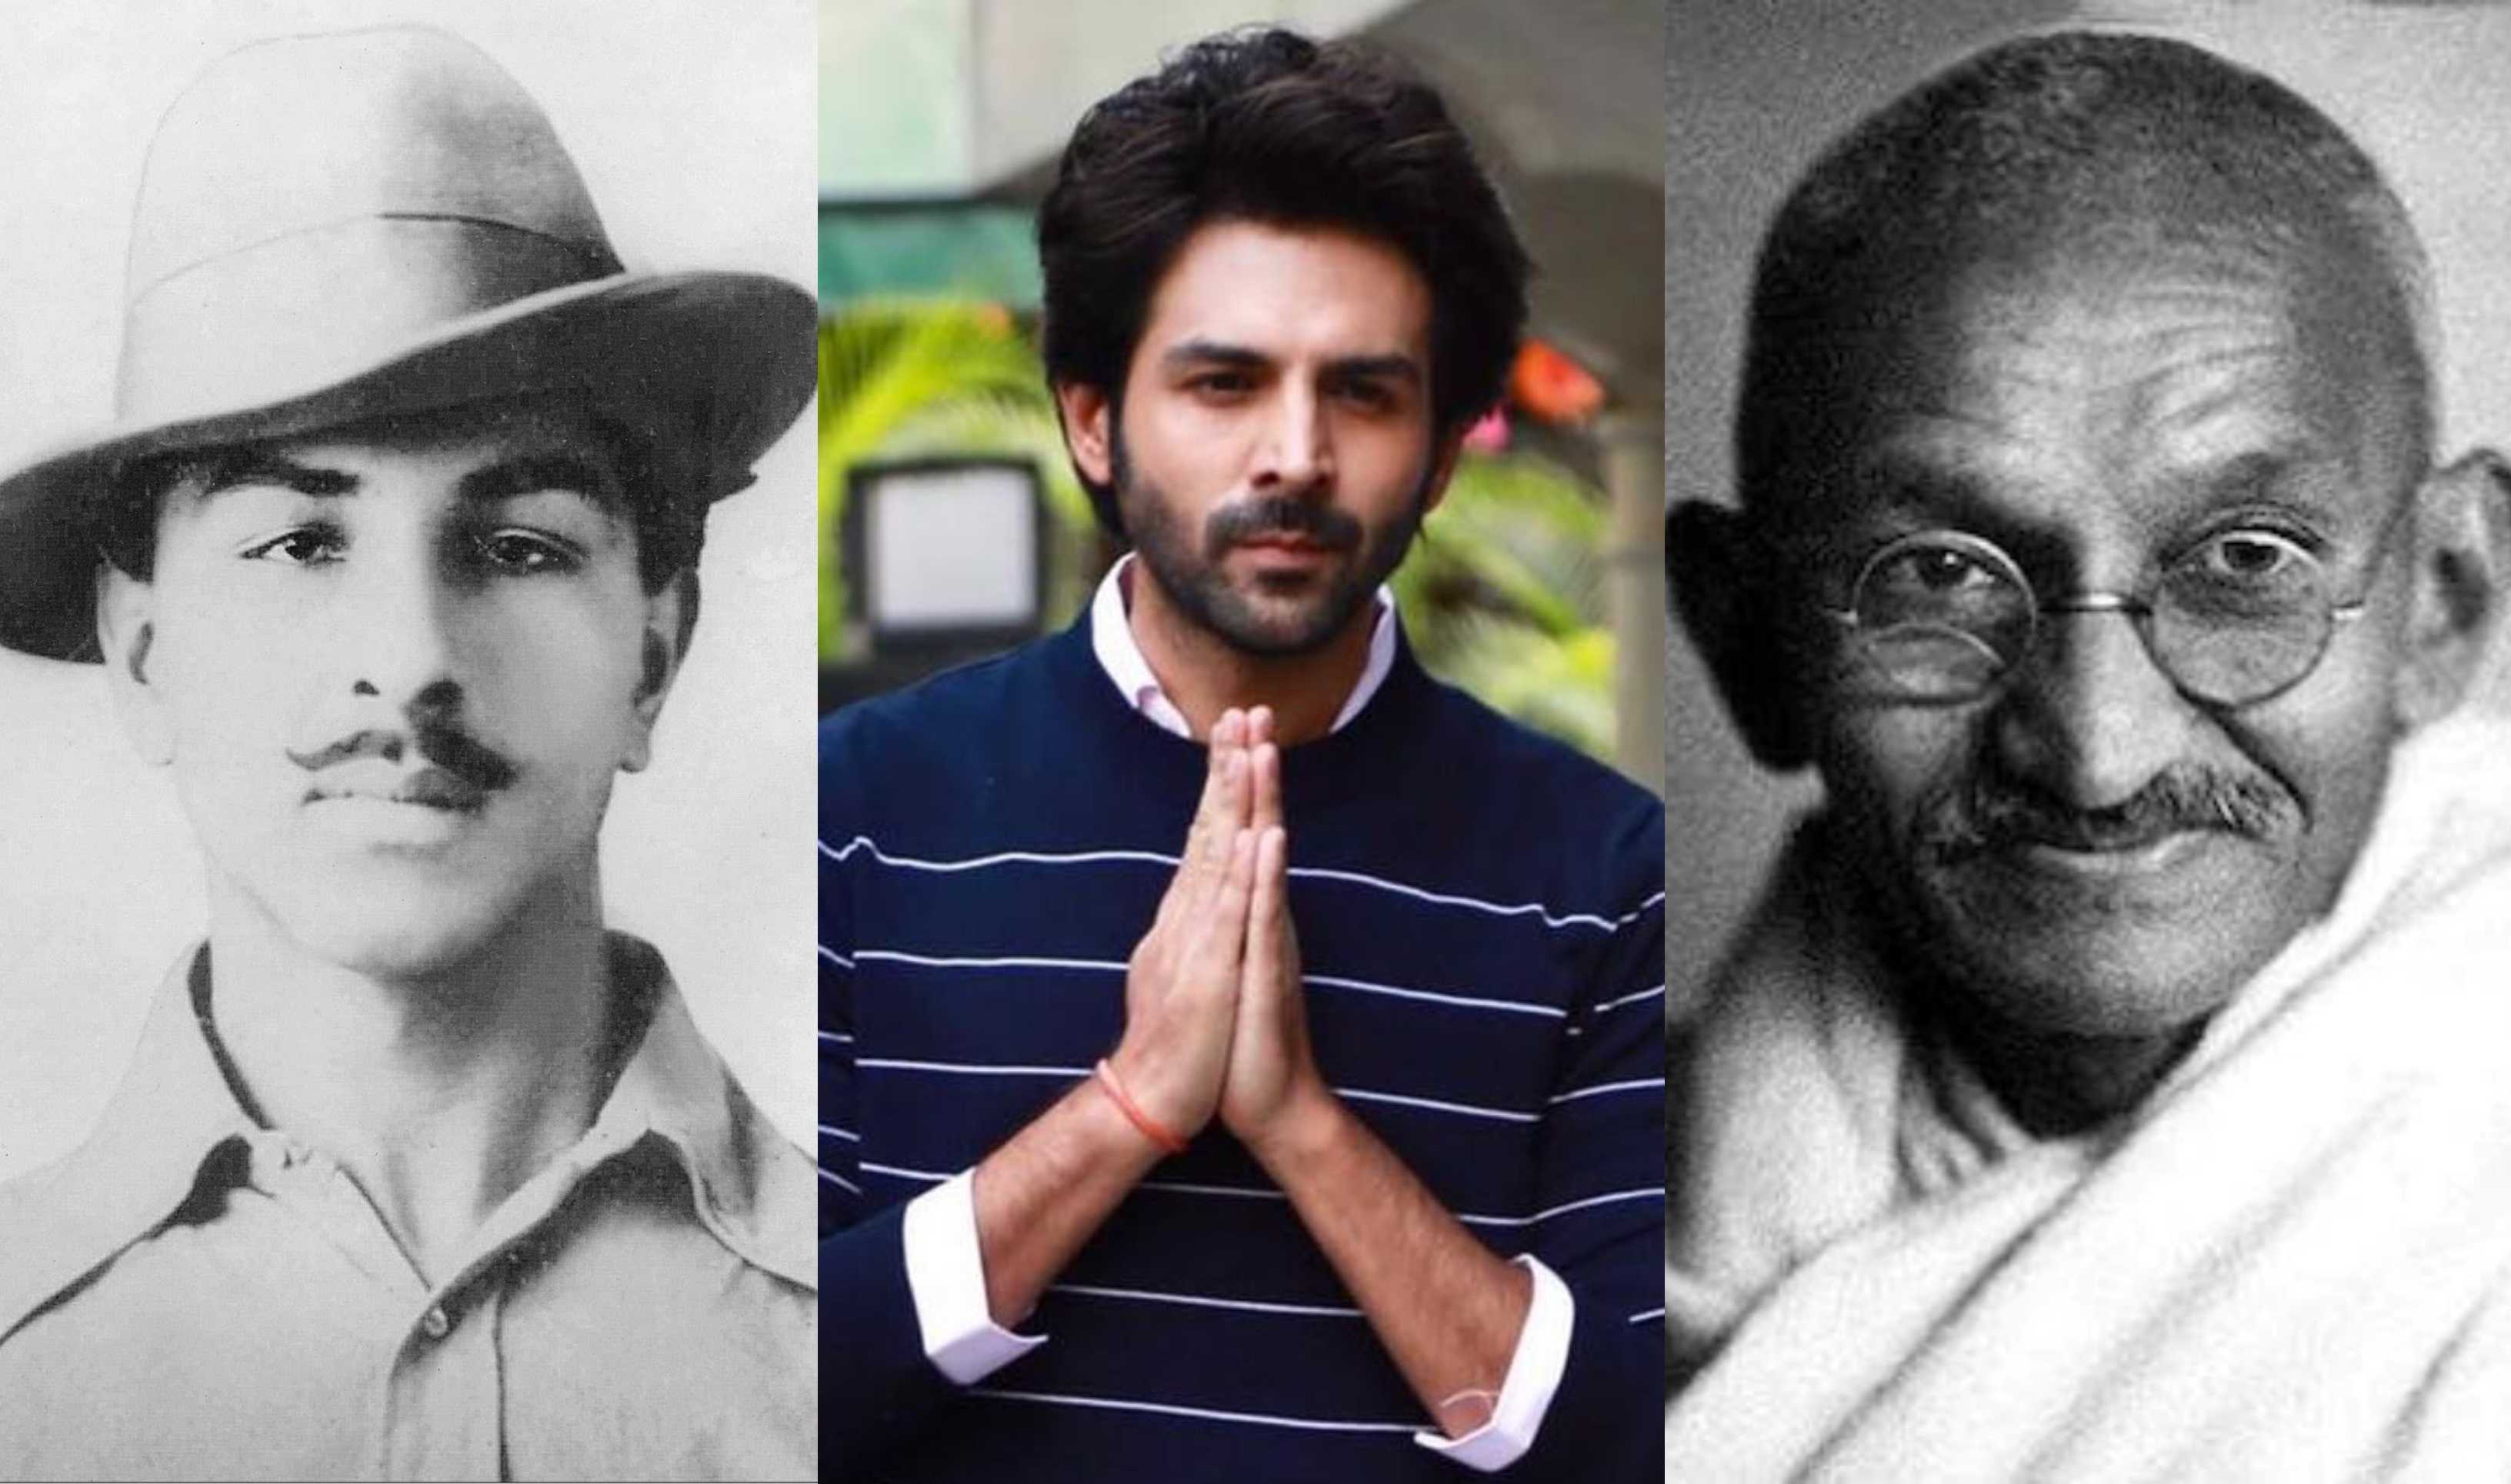 Kartik Aaryan was inspired by Bhagat Singh & Gandhi ji while growing up; reveals if he would do a freedom fighter’s biopic